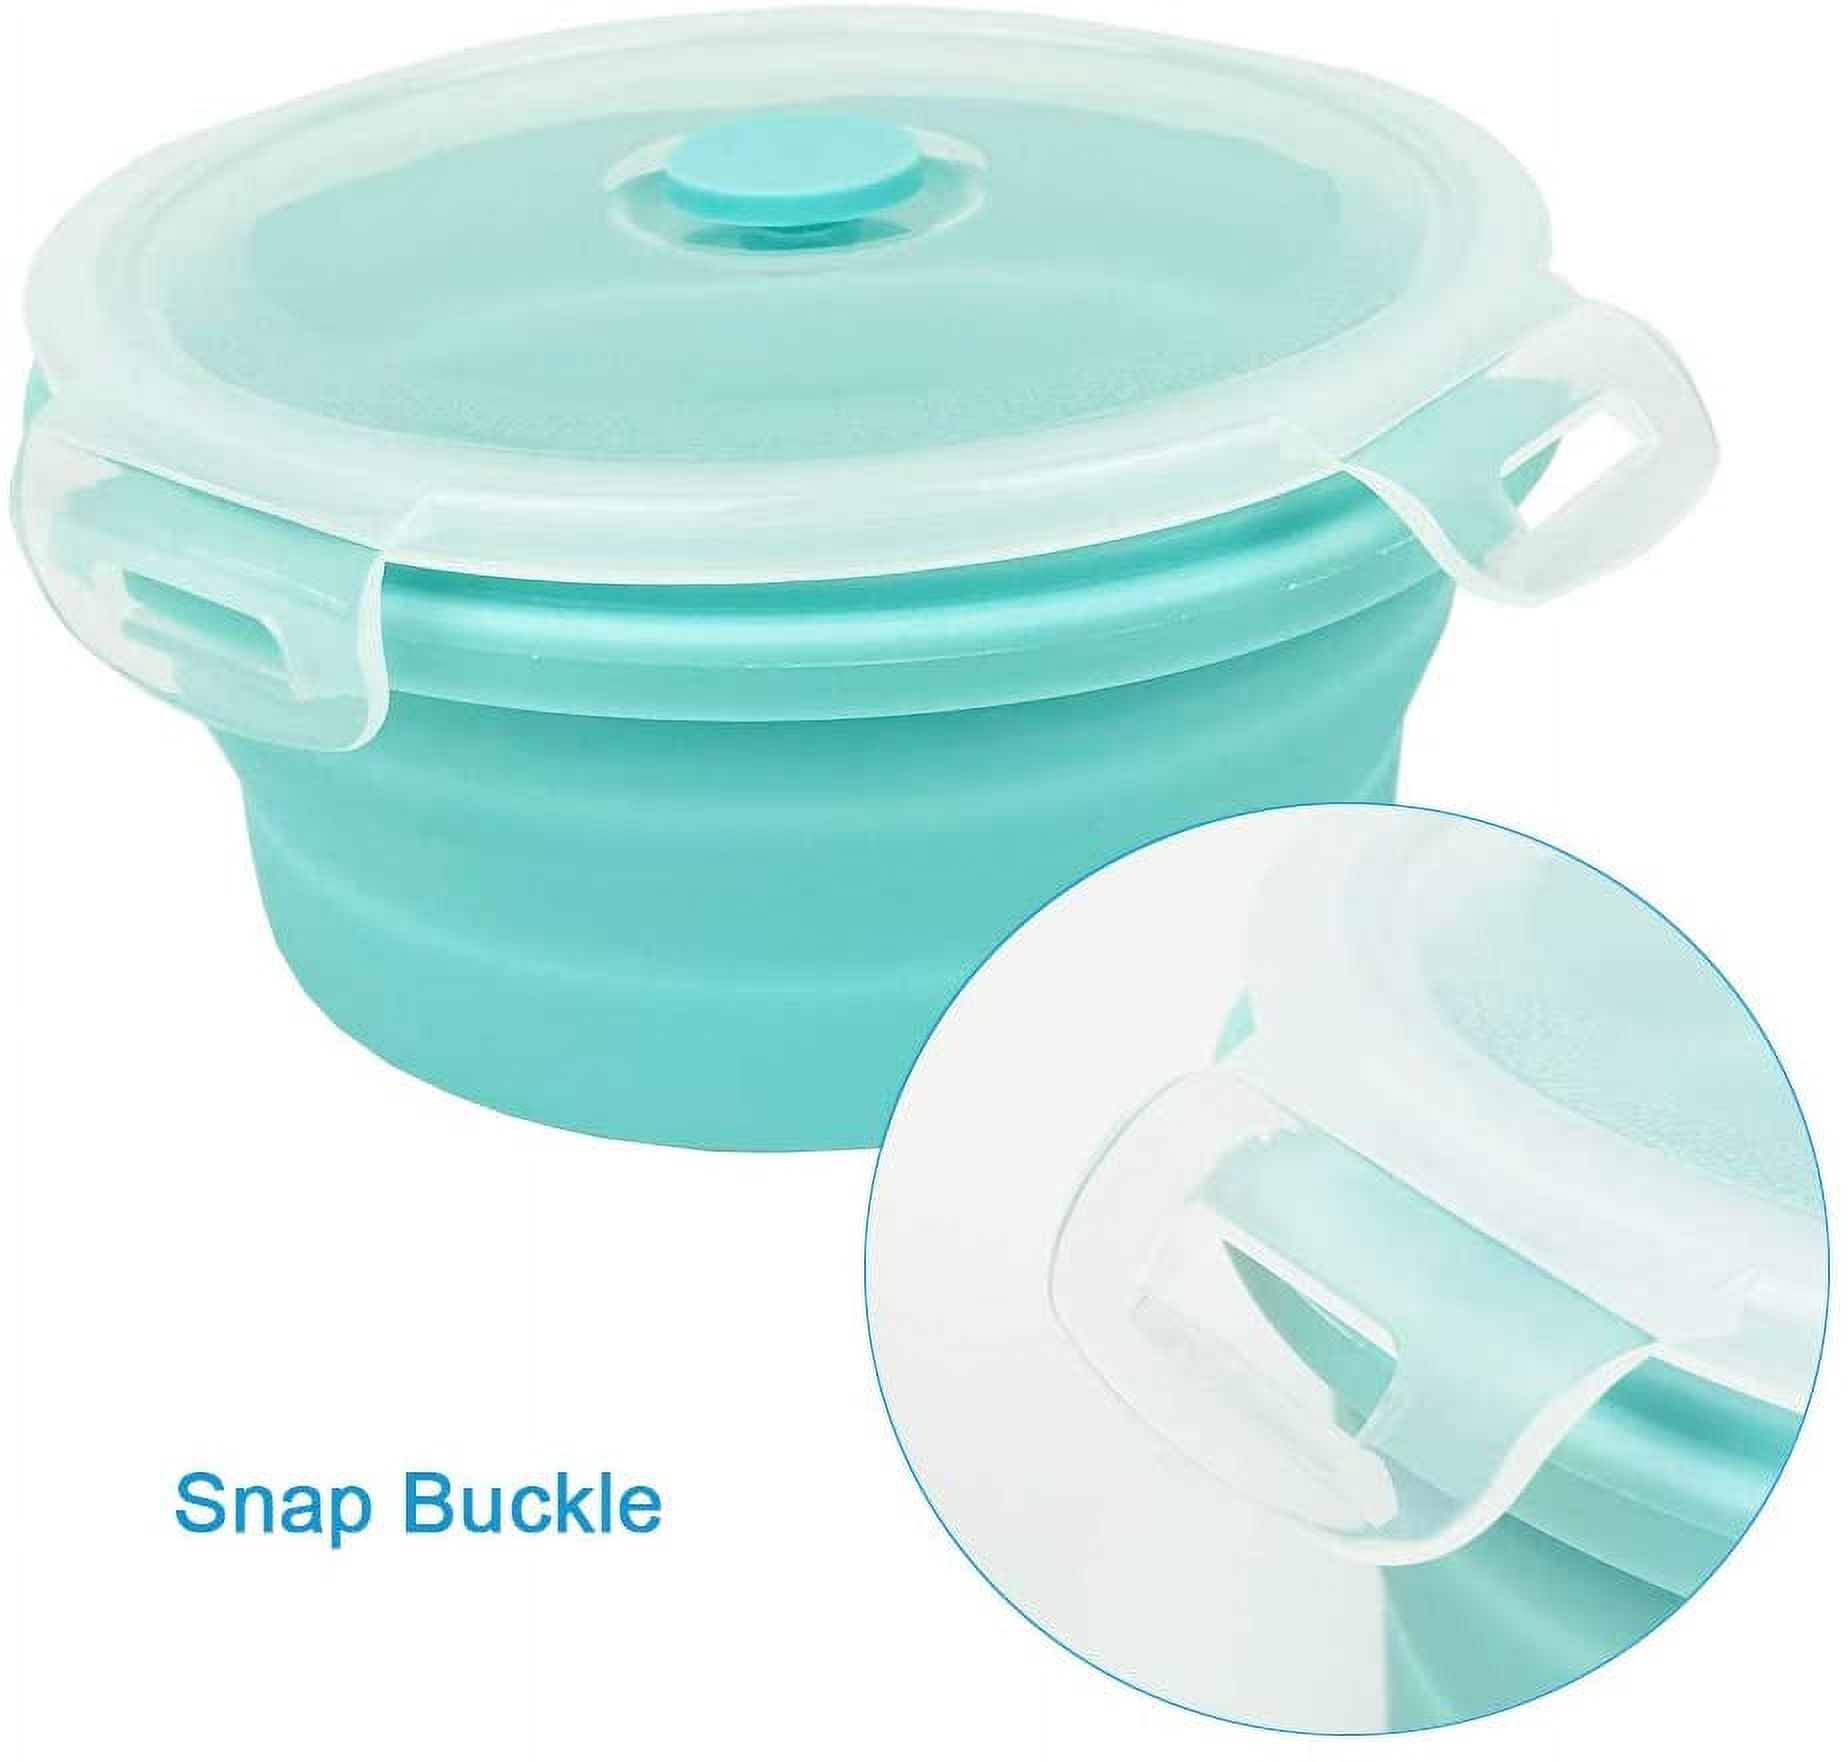 Casewin 42oz Silicone Collapsible Bowls - Silicone Folding Travel Bowl with  Lids - Expandable Food Storage Containers - BPA Free, Portable, Compatible